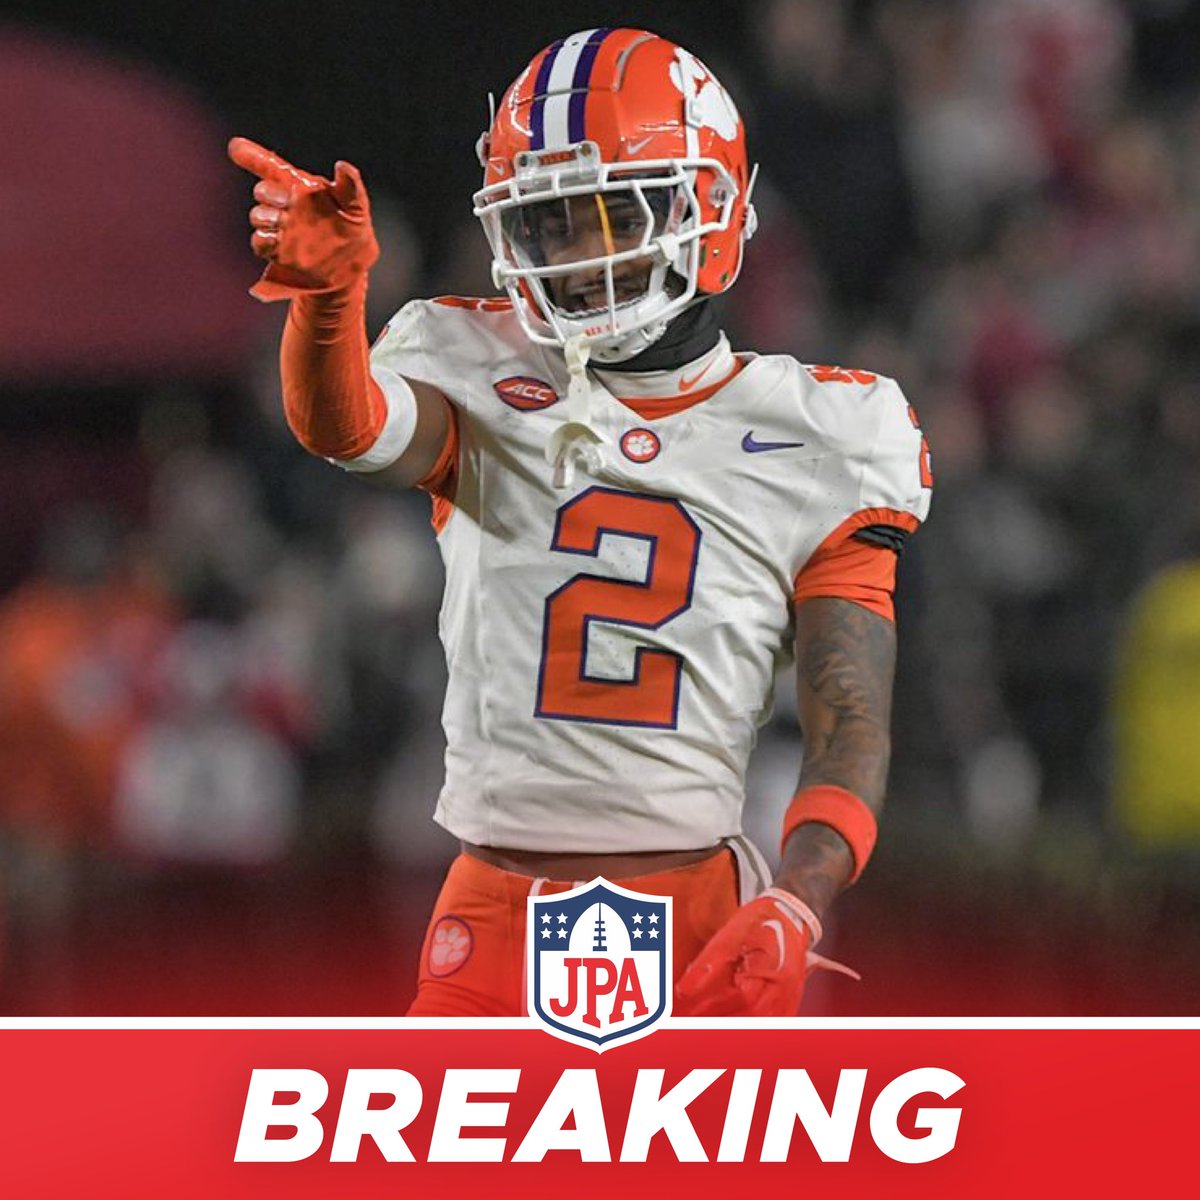 𝗕𝗥𝗘𝗔𝗞𝗜𝗡𝗚: The #Ravens have signed first round CB Nate Wiggins to a fully guaranteed 4-year deal worth over $12 million.

He’s the first player drafted round 1 to sign.